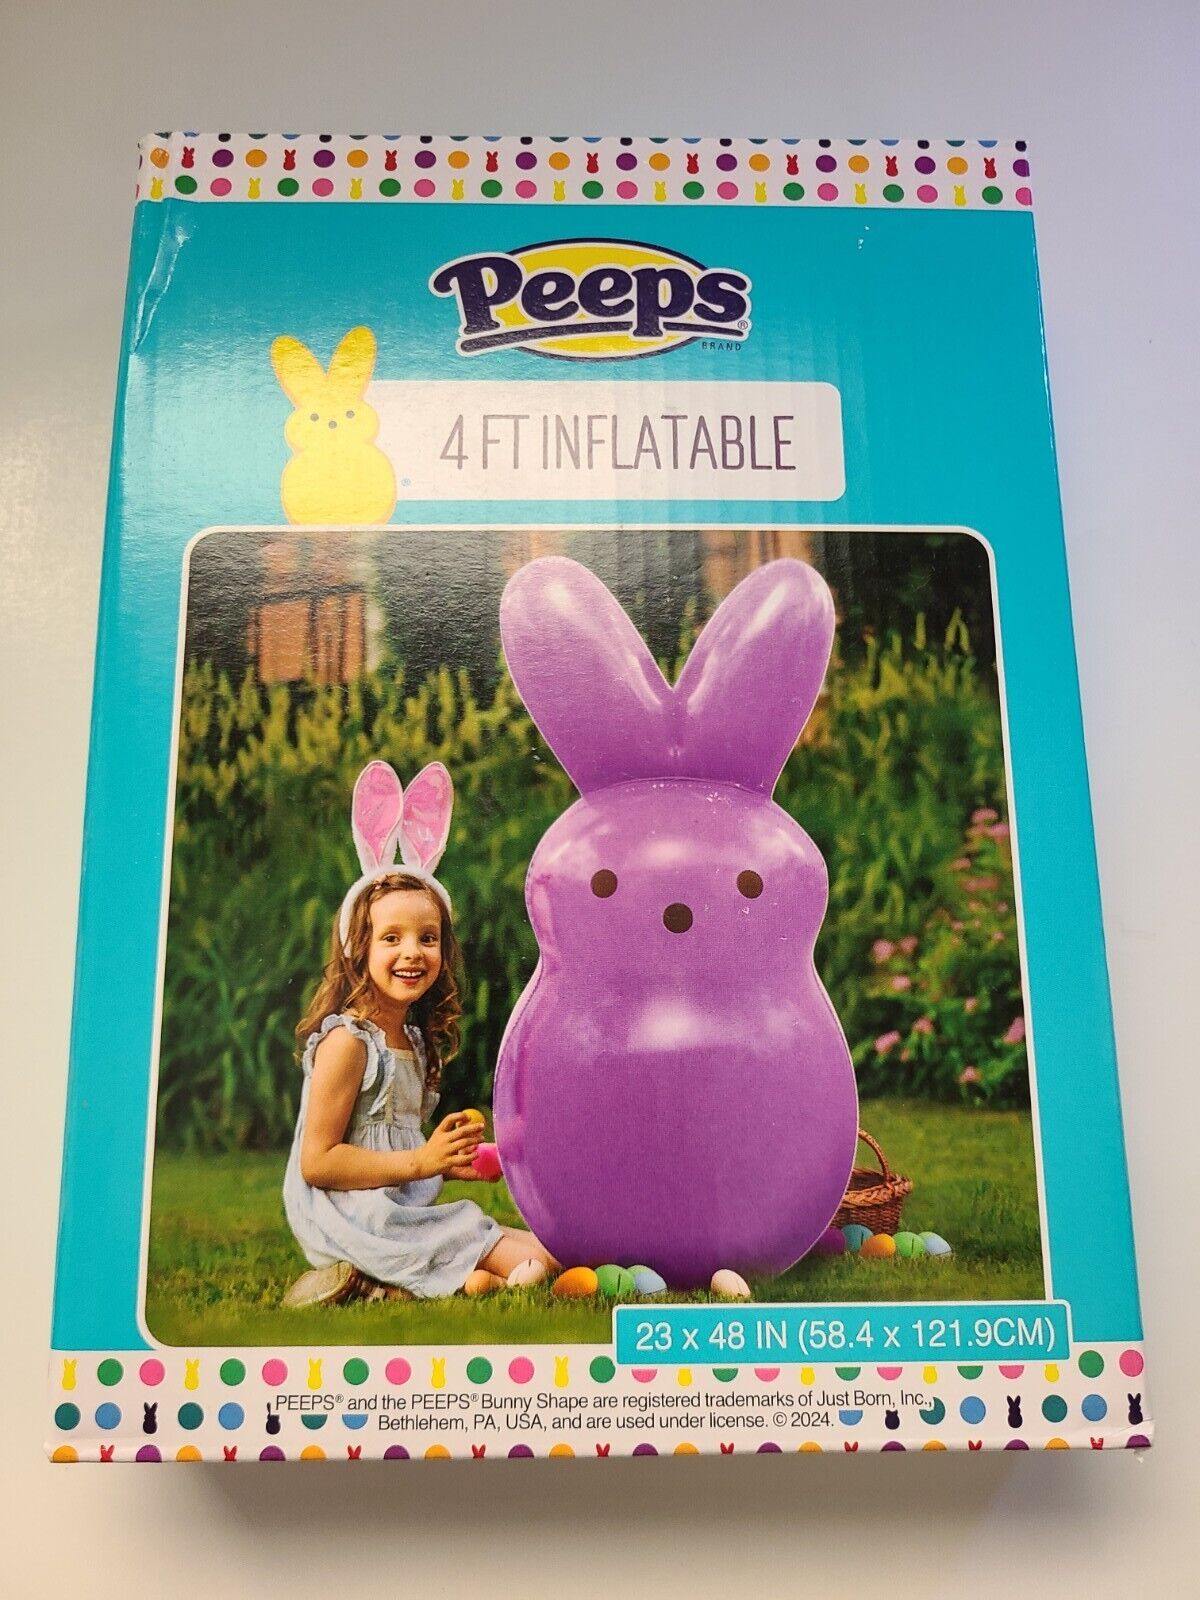 NEW IN BOX PEEPS 4 FT INFLATABLE Purple BUNNY